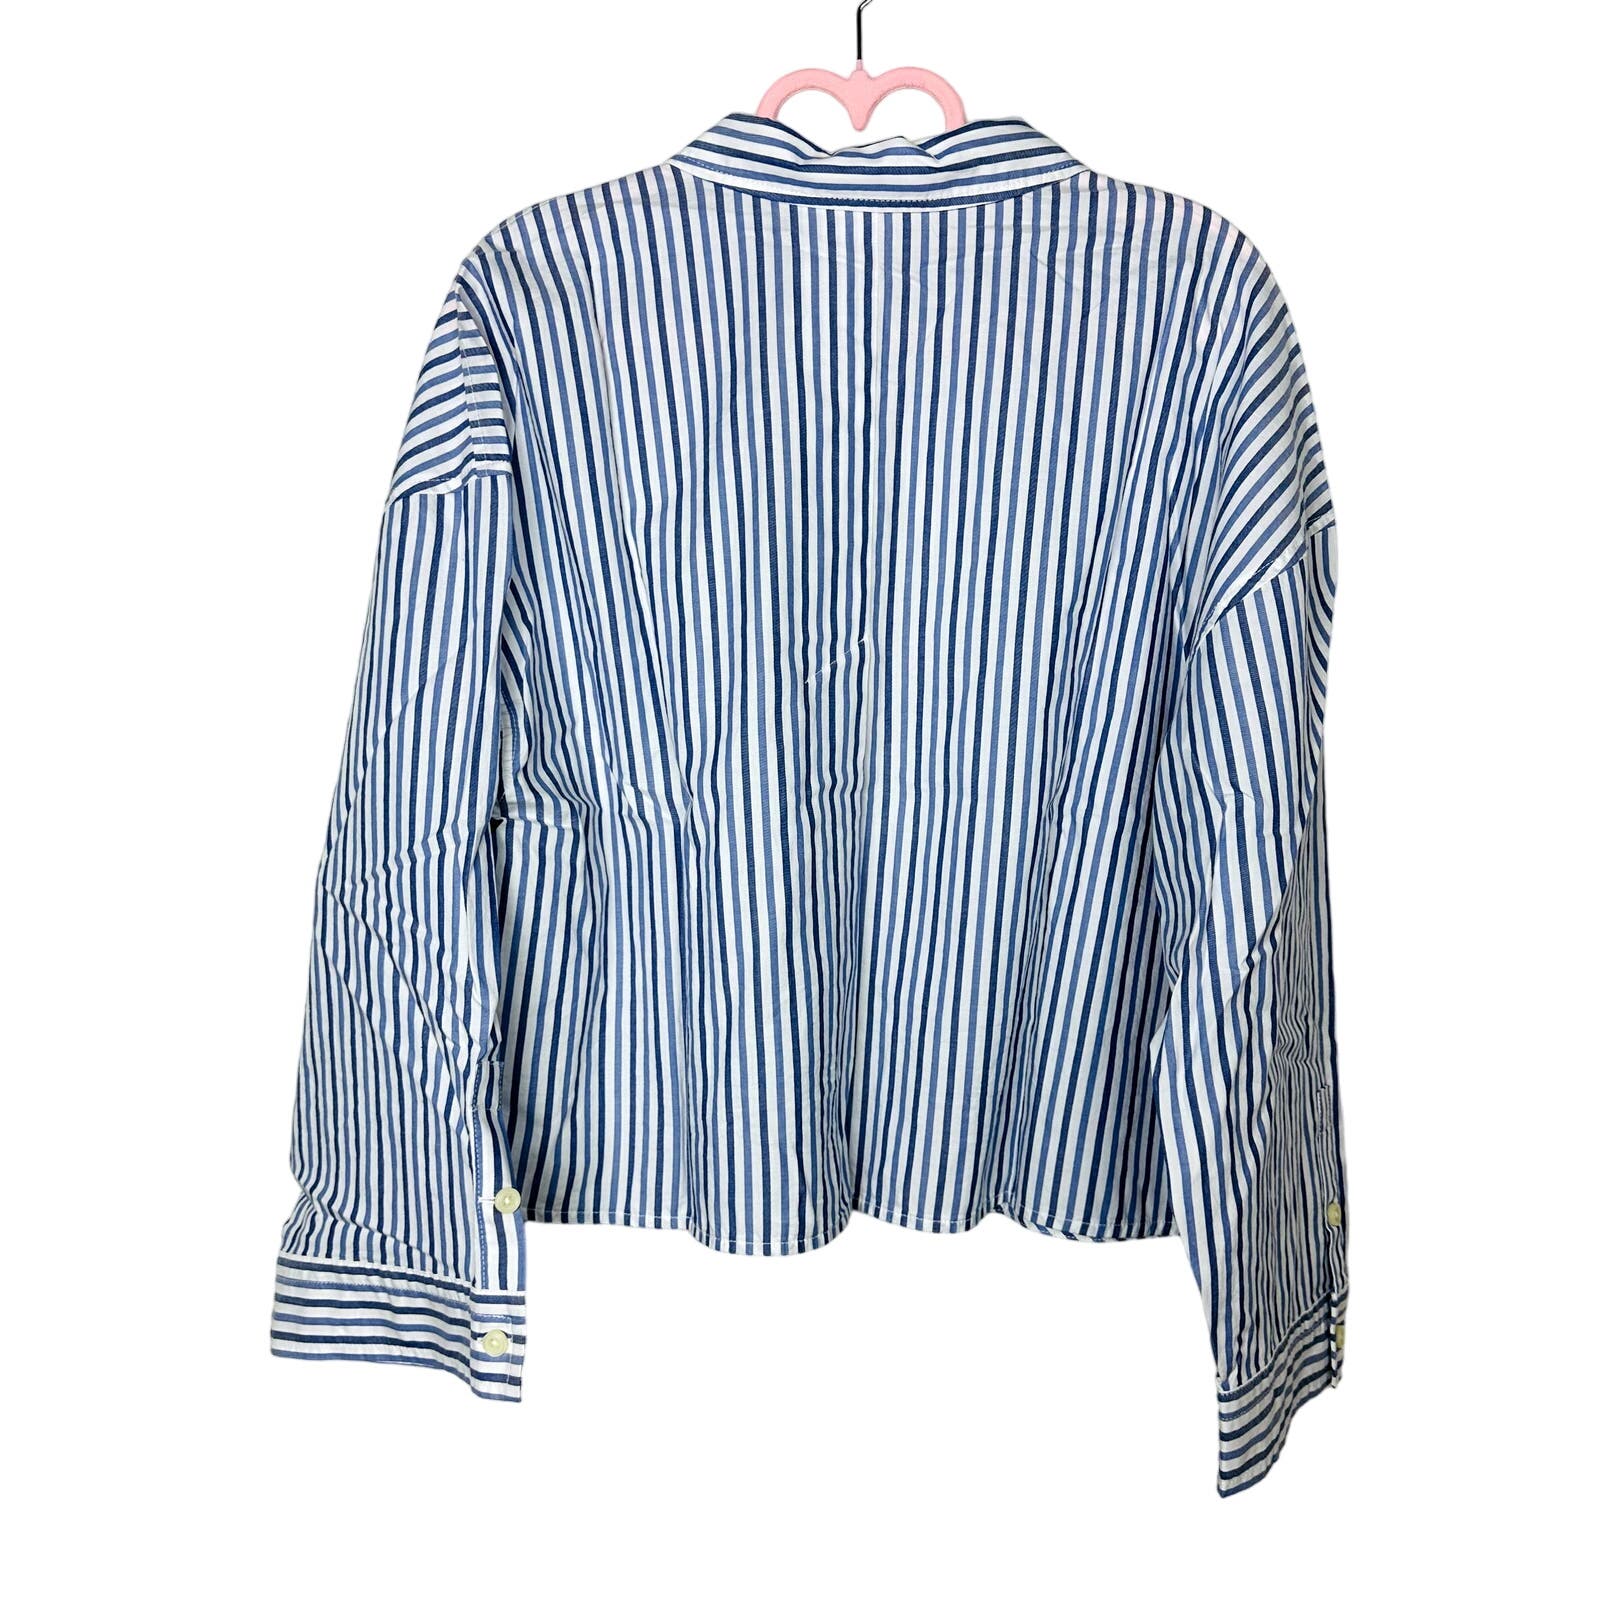 Everlane NWT The Woven P.J. Longsleeve Button Front Striped Top Blue White SZ XS